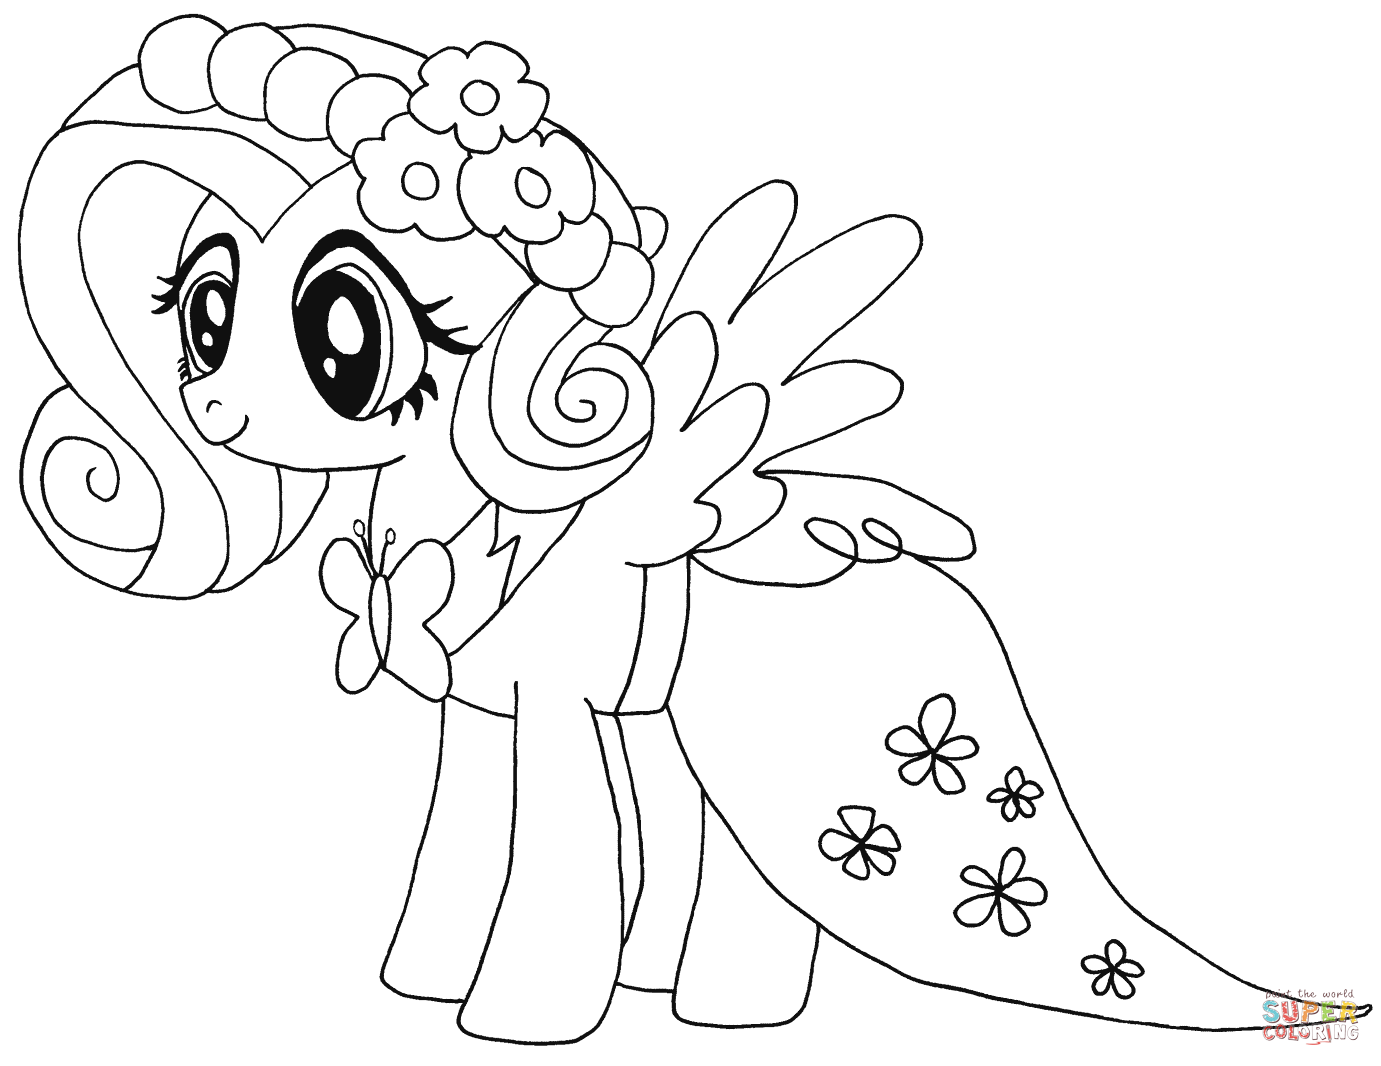 My Little Pony Fluttershy coloring page | Free Printable Coloring ...